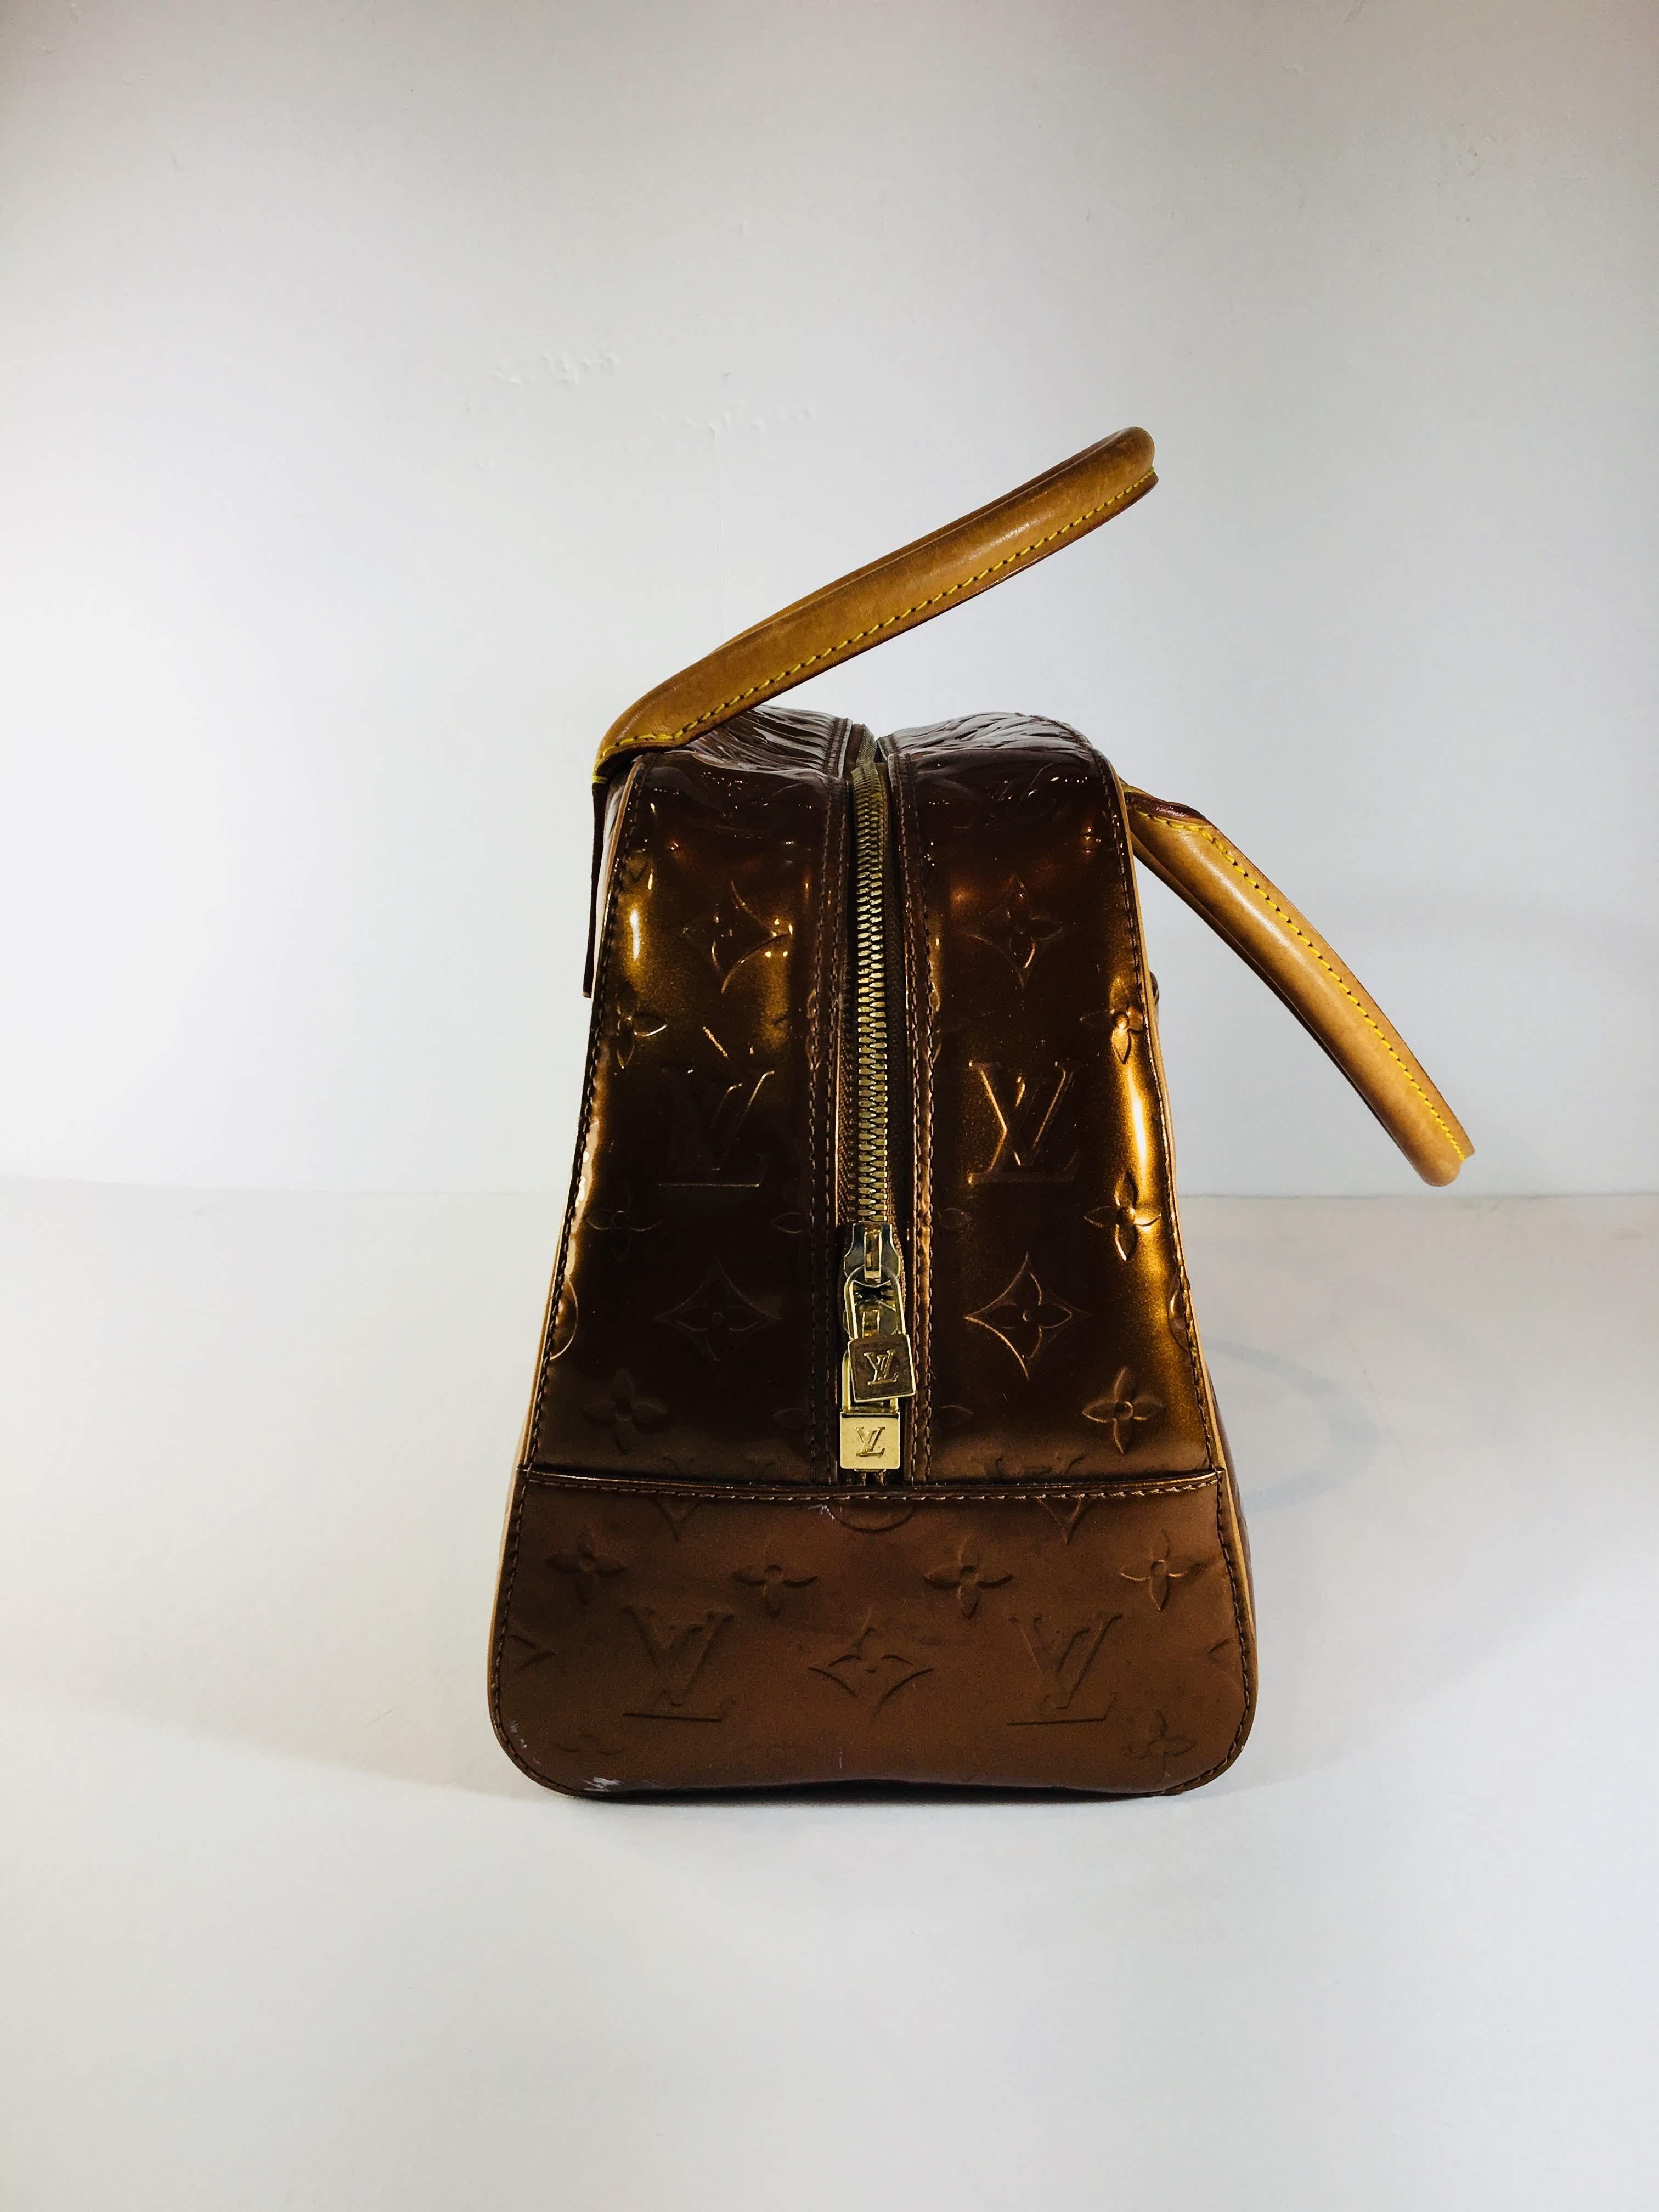 Copper Vernis Tompkins Patent Leather Handle Bag with Zipper Closure and Side Pocket 
14.50